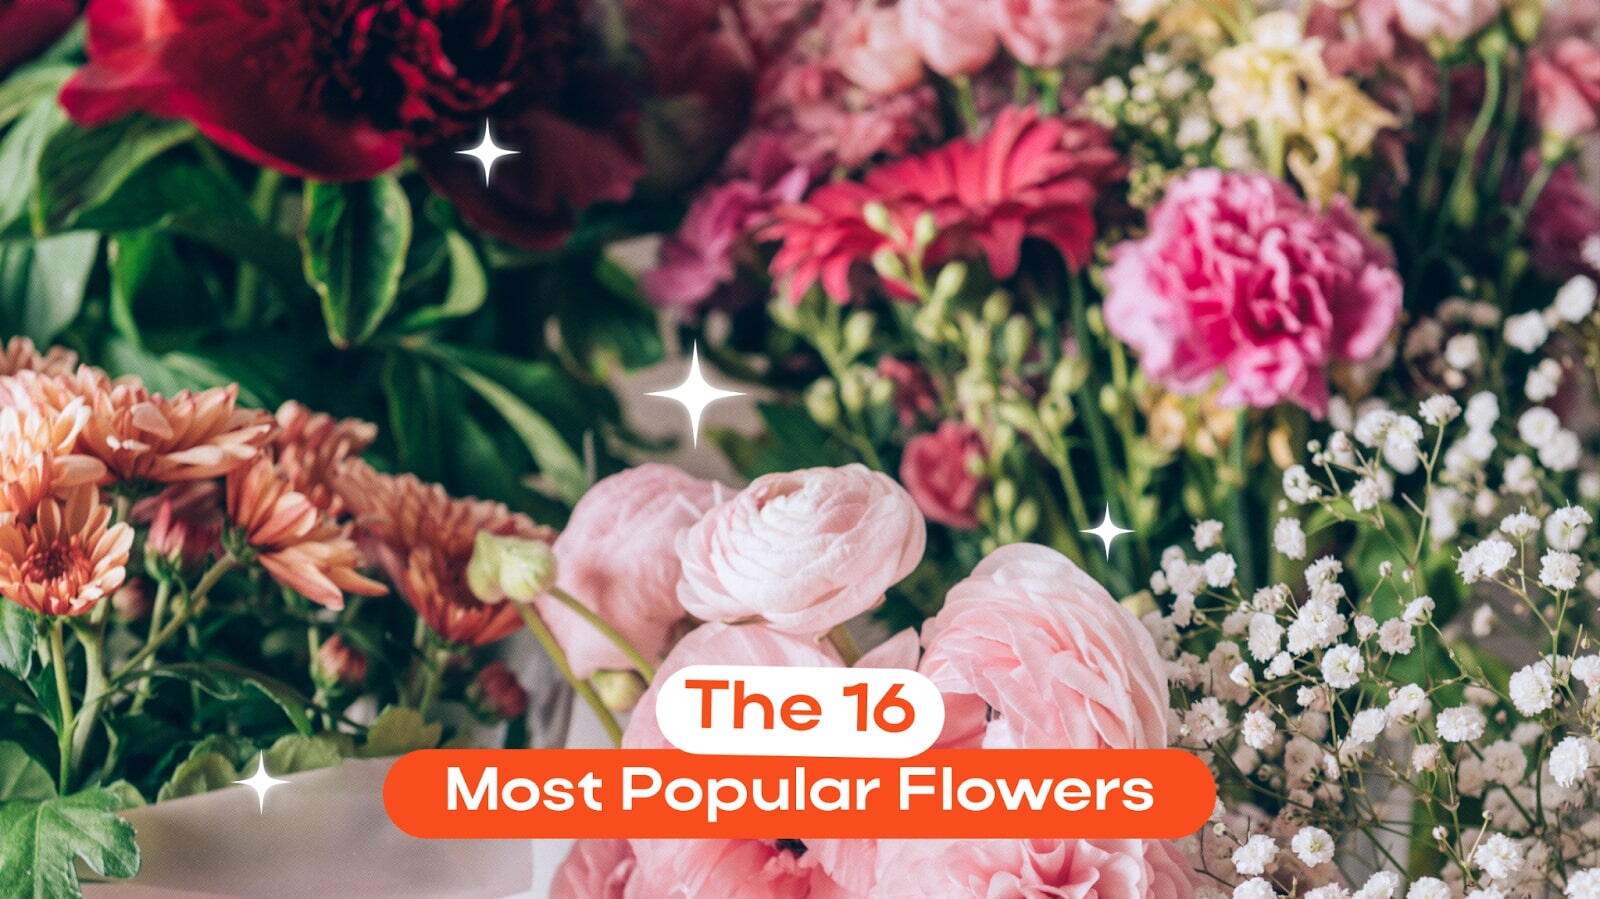 The 16 most Popular Flowers